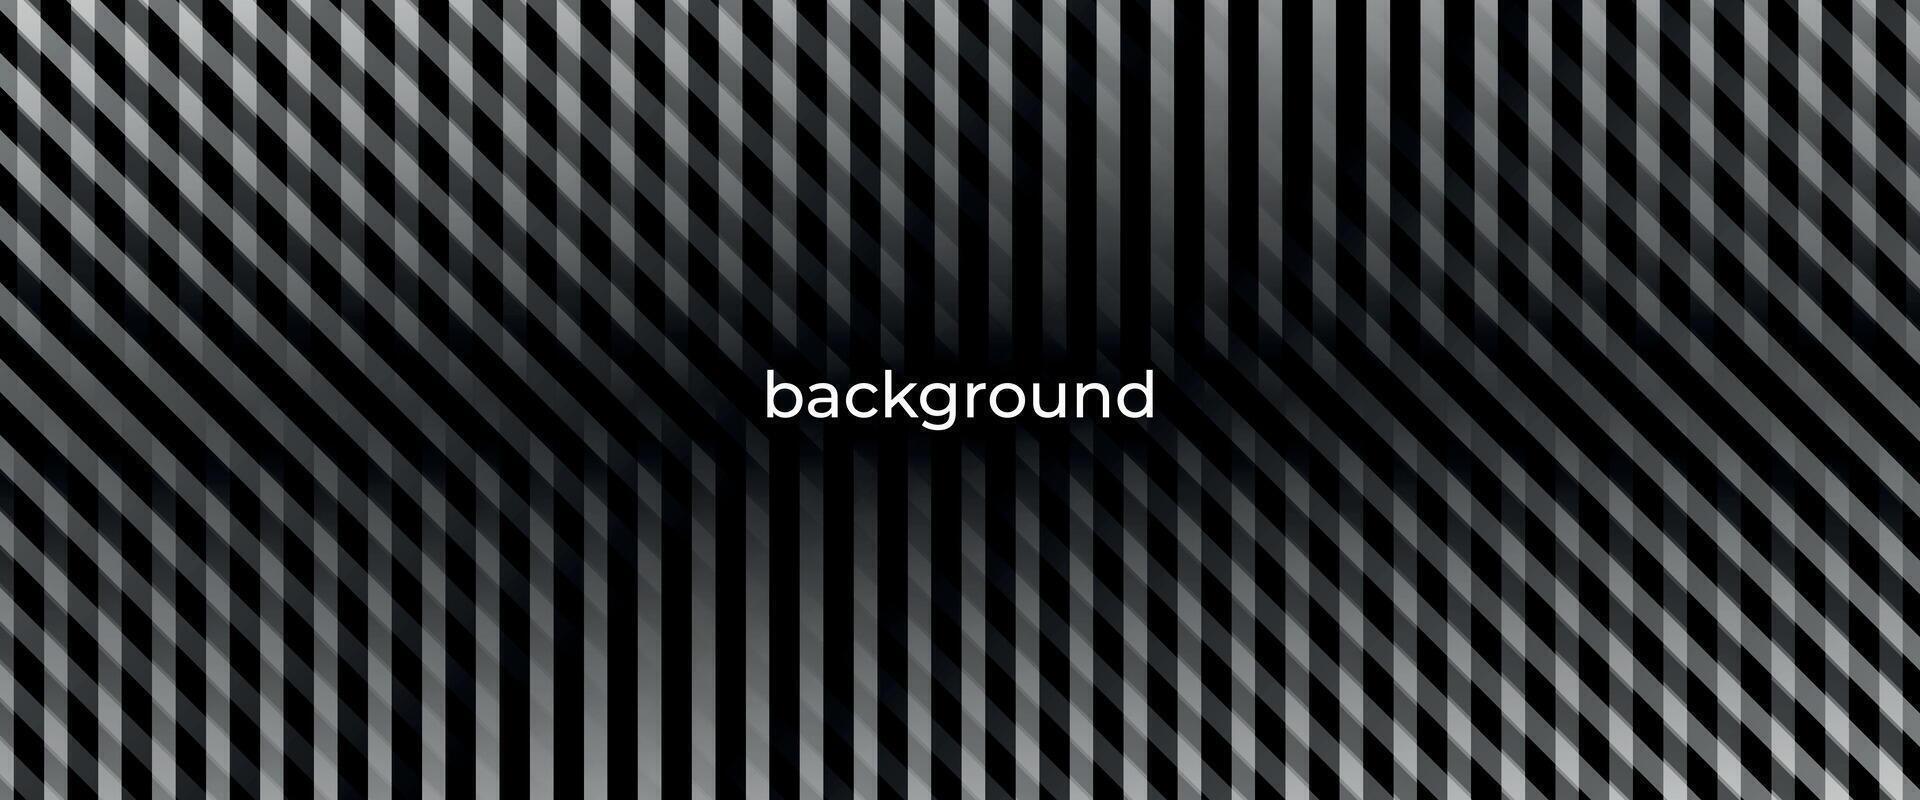 Abstract black background with light stripes vector